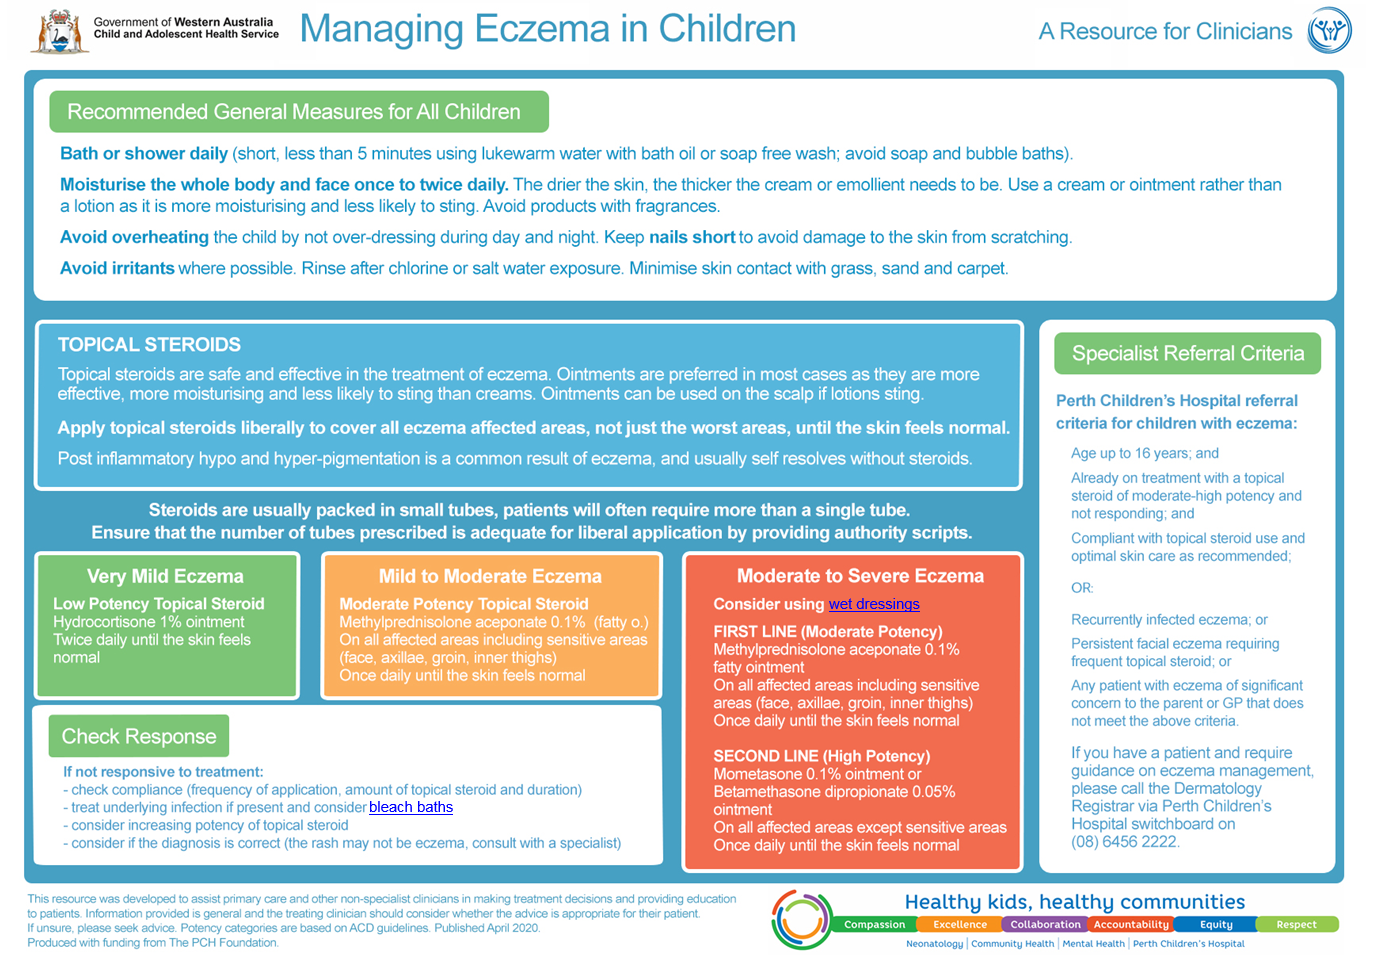 Managing eczema in children guide for clinicians